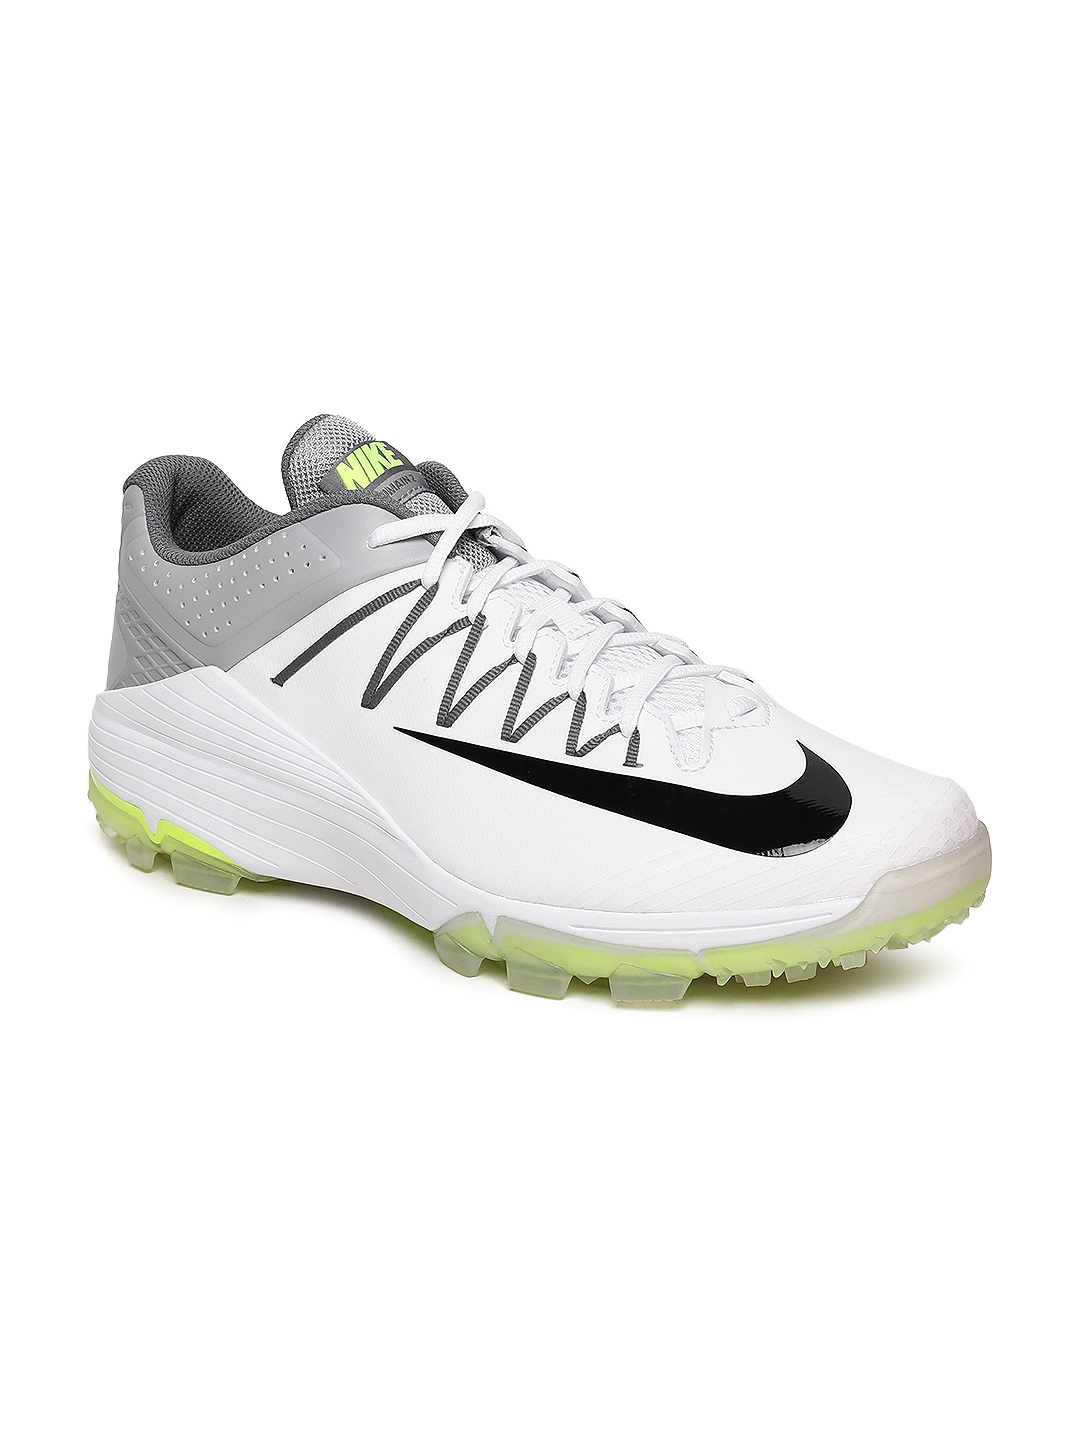 nike domain 2 cricket shoes online